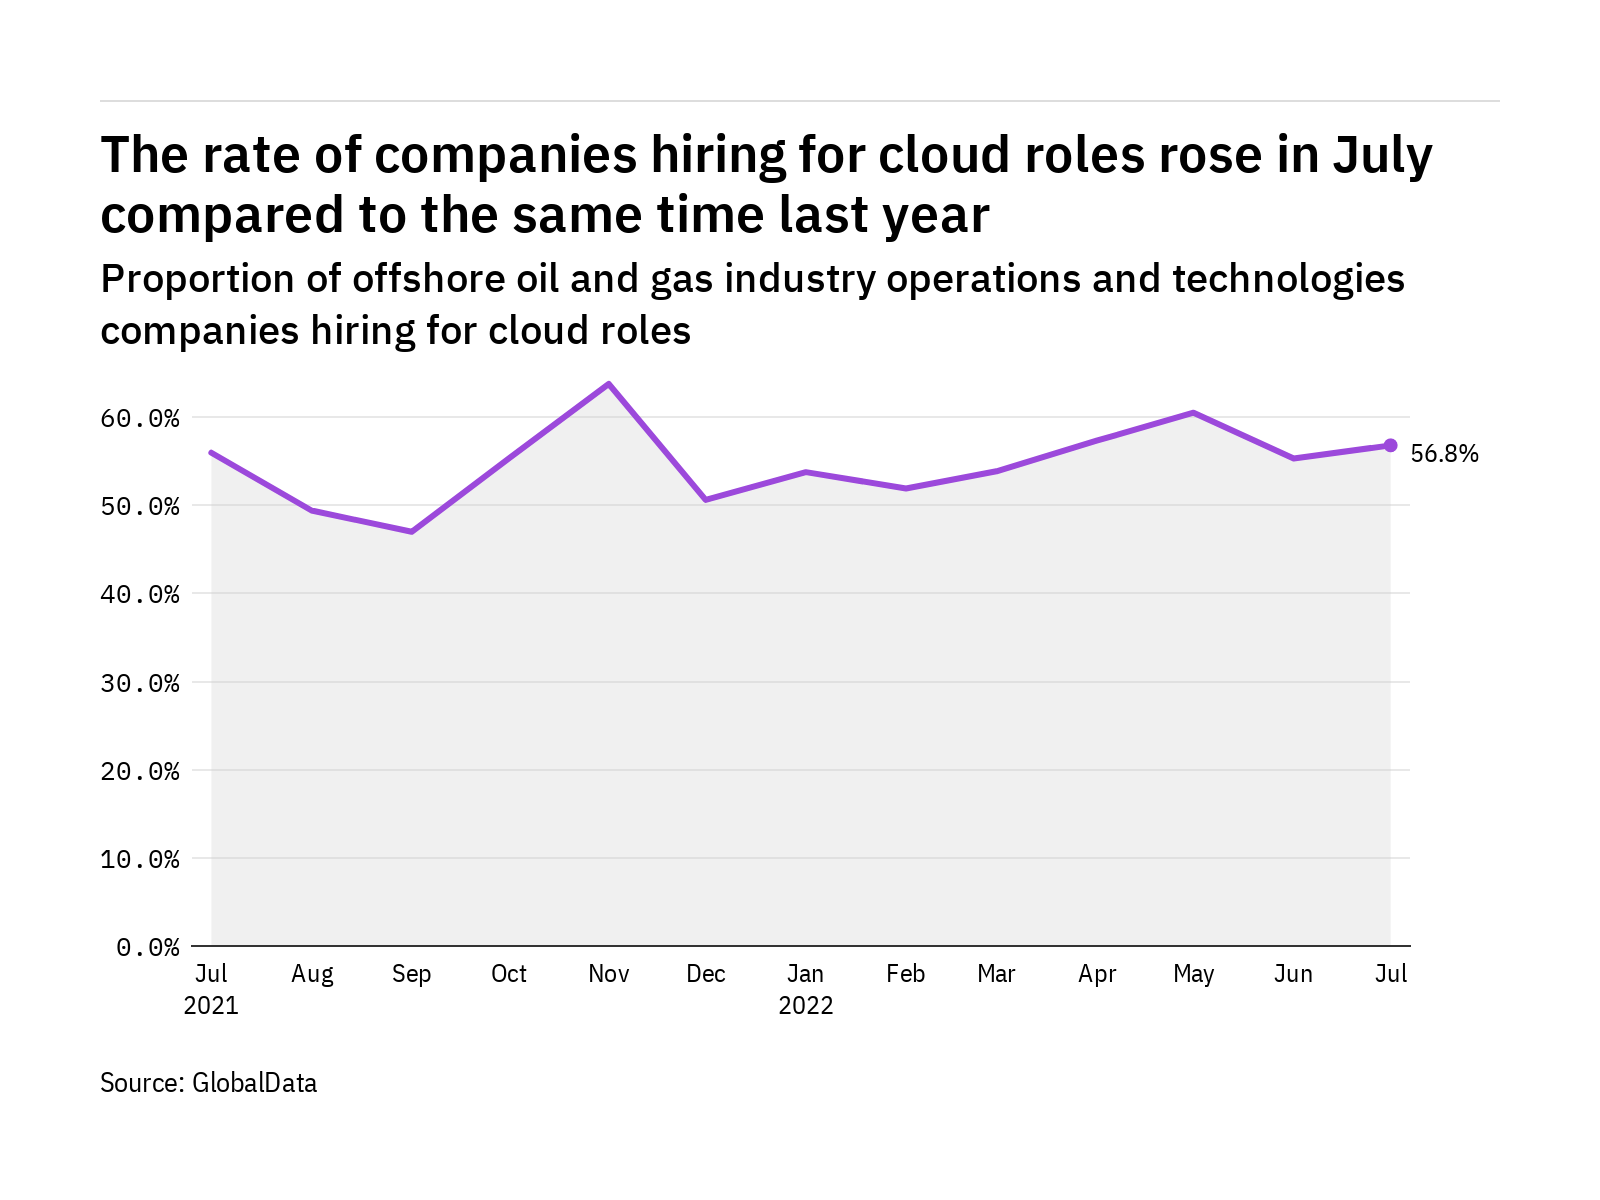 Cloud hiring levels in the offshore industry rose in July 2022